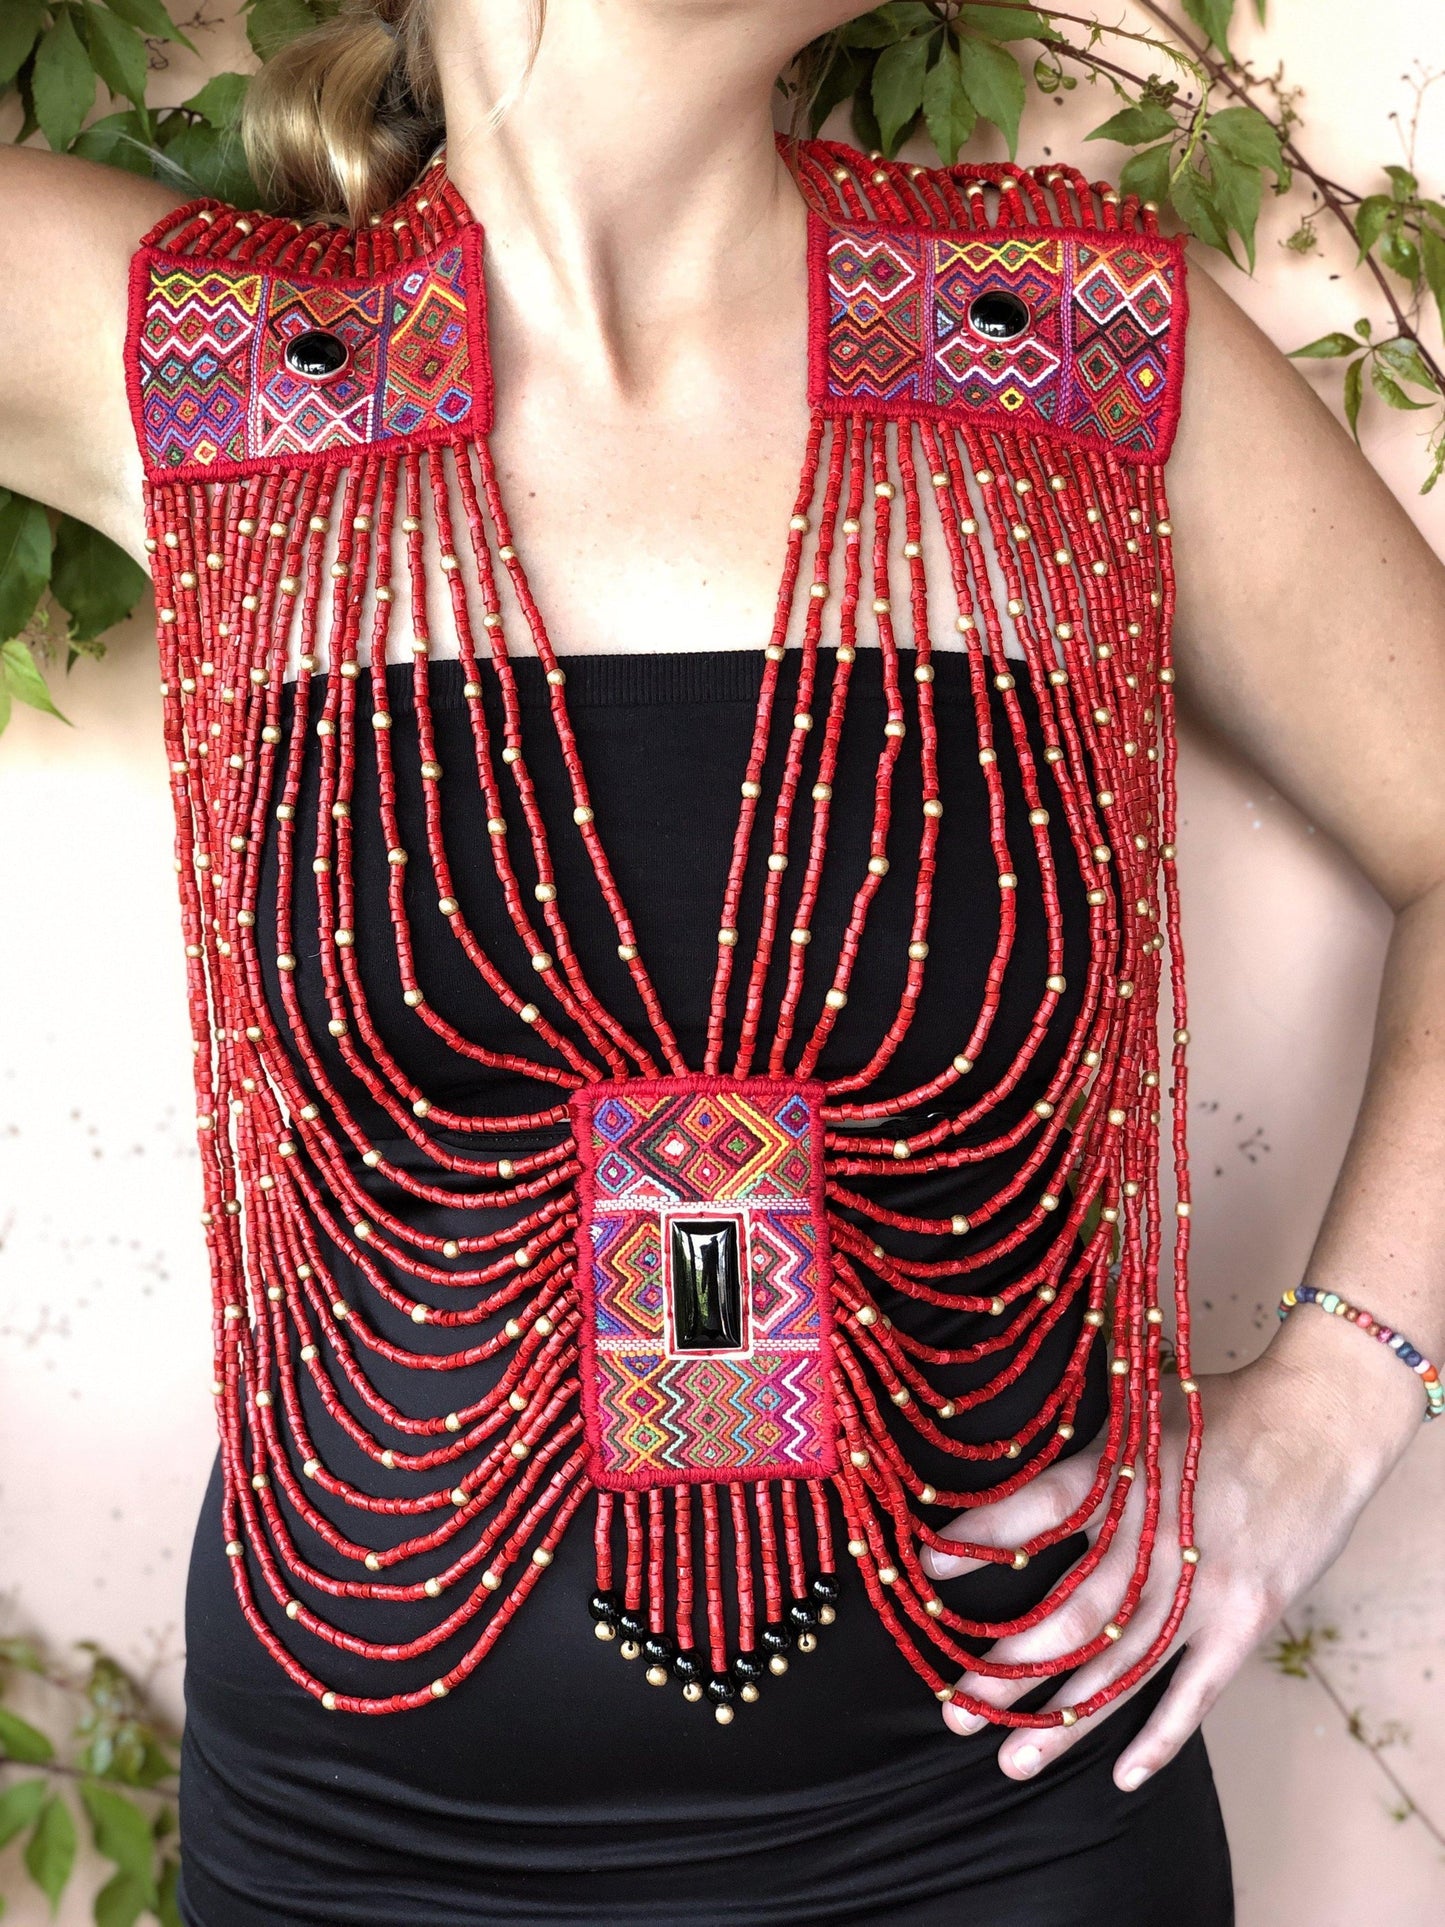 Beaded Chains Shoulder Pieces with Decorative Patches - "Warrior"